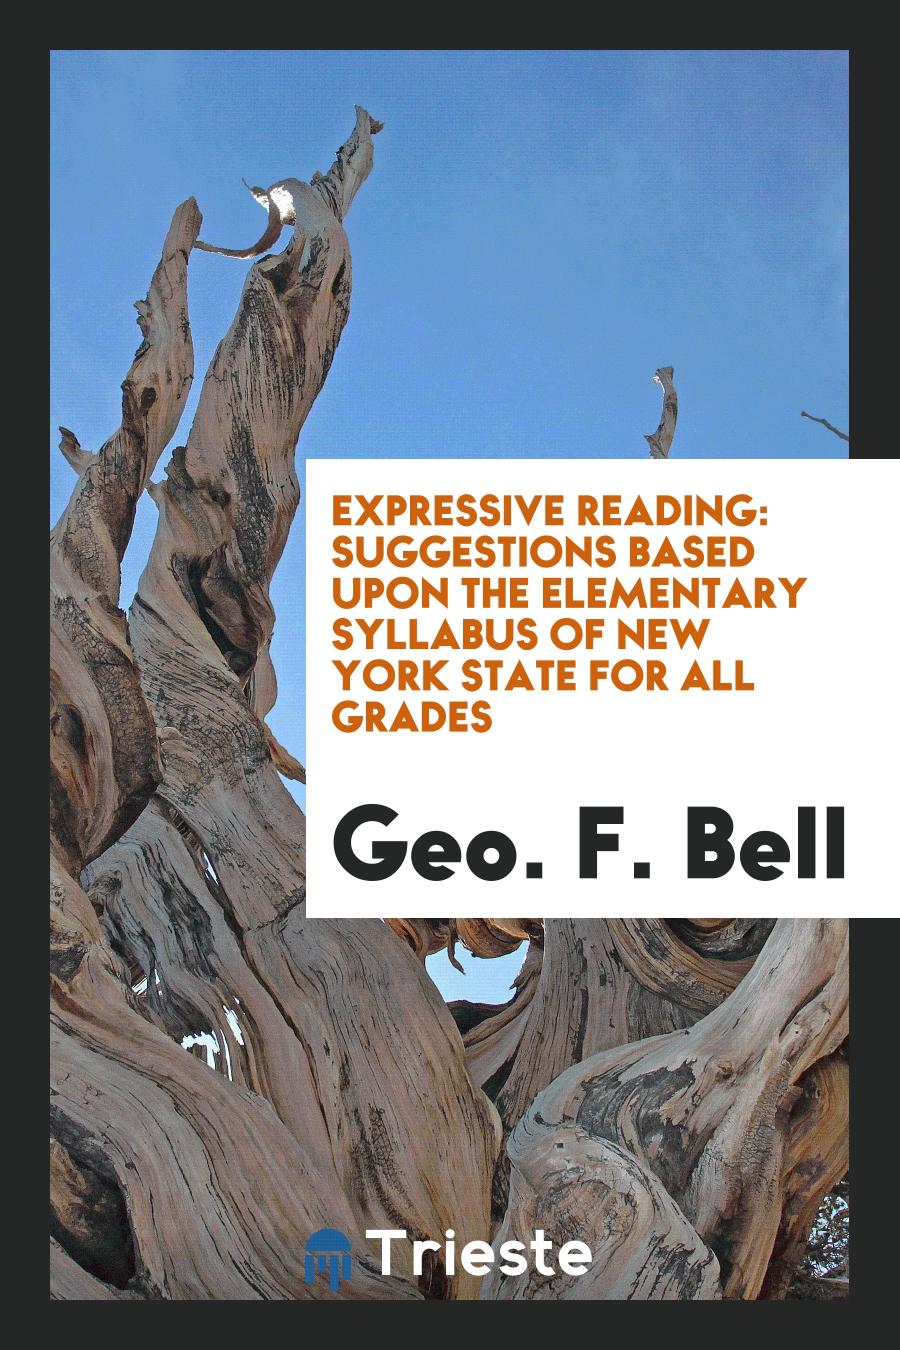 Expressive Reading: Suggestions Based Upon the Elementary Syllabus of New York State for All Grades